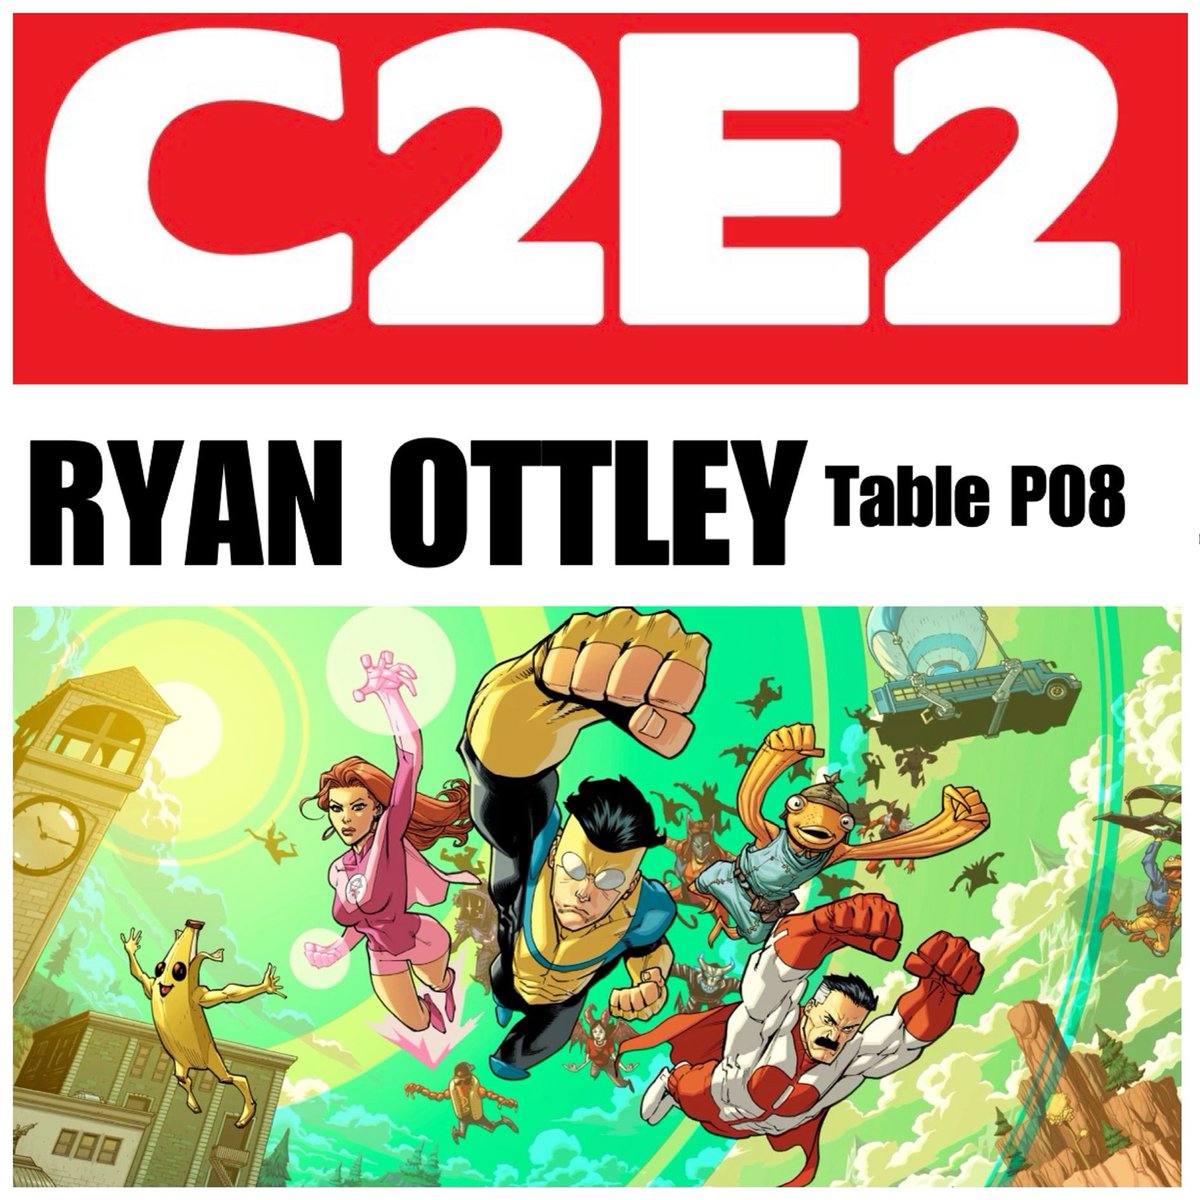 Been a while since I’ve attended the amazing @c2e2 convention! I’ll be there this weekend. Go to table P08 in Artist Alley to see my signing times and commission availability. See you soon, Chicago!